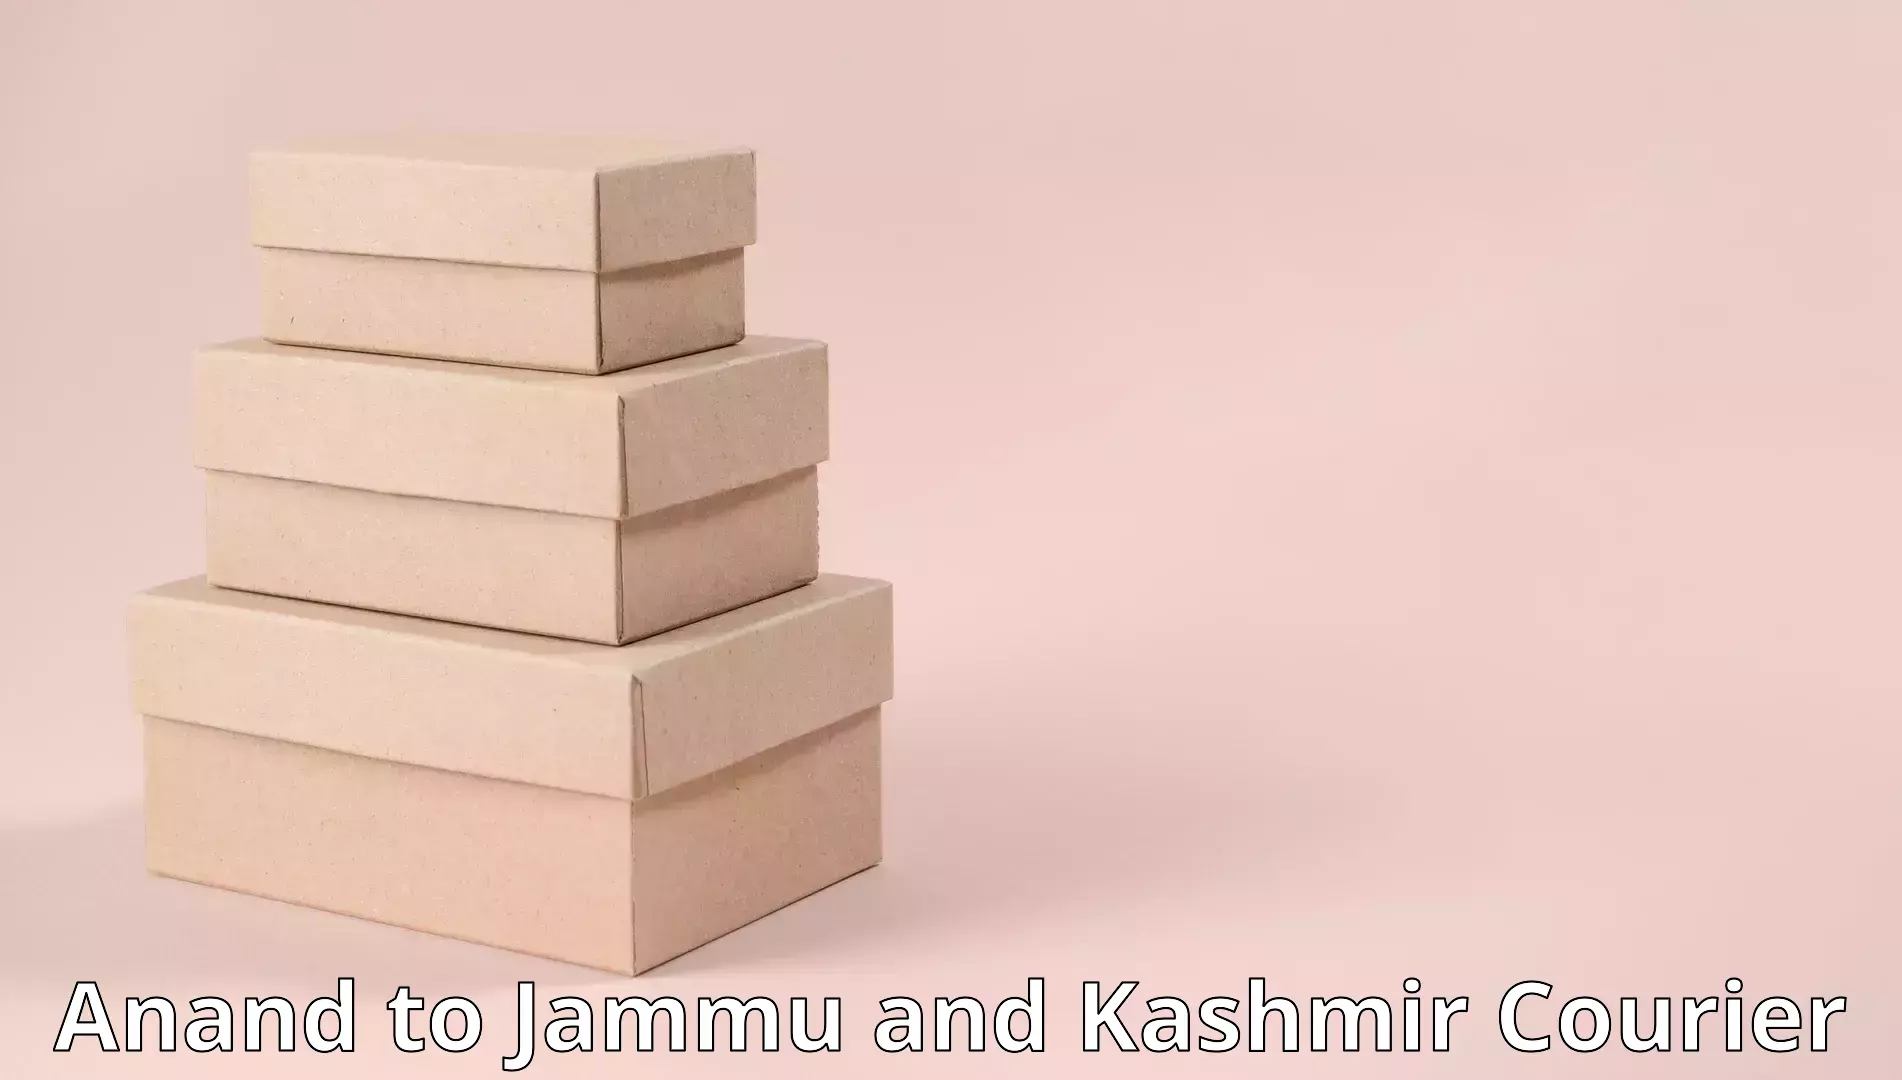 Furniture transport experts Anand to Jammu and Kashmir